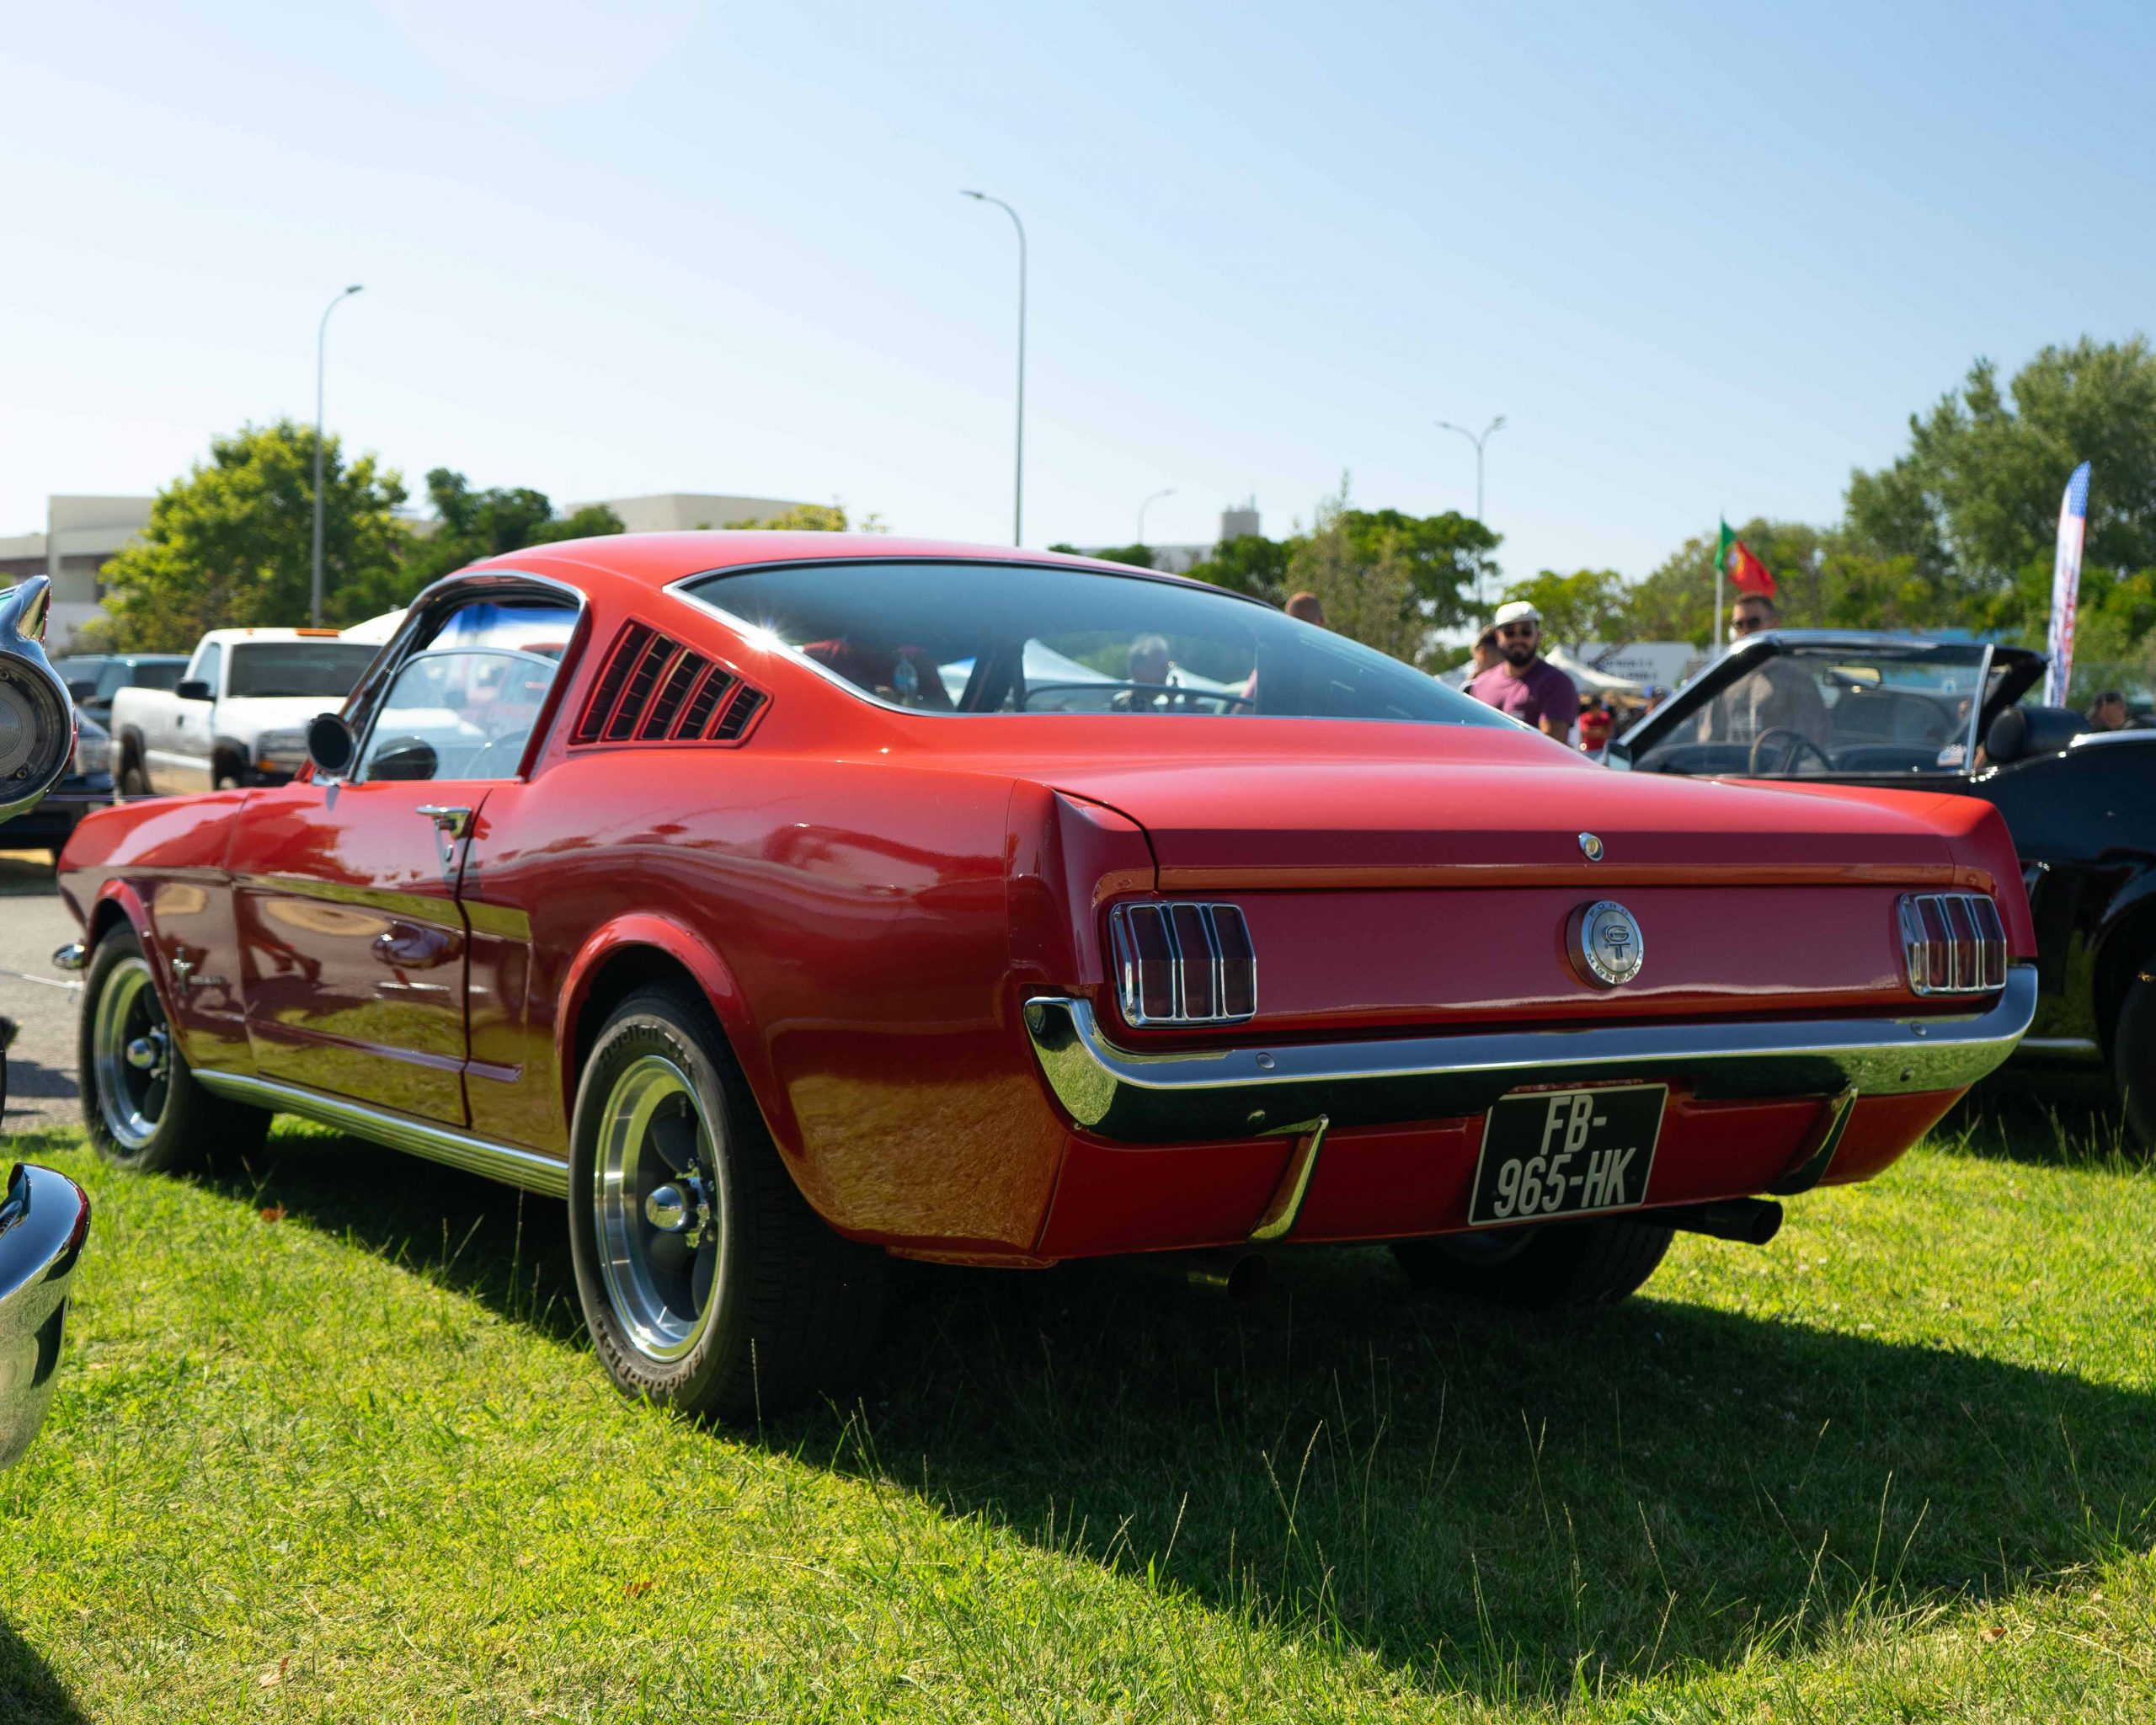 Discover the Ultimate Experience with SAVG at the 11th Americancars Algarve!